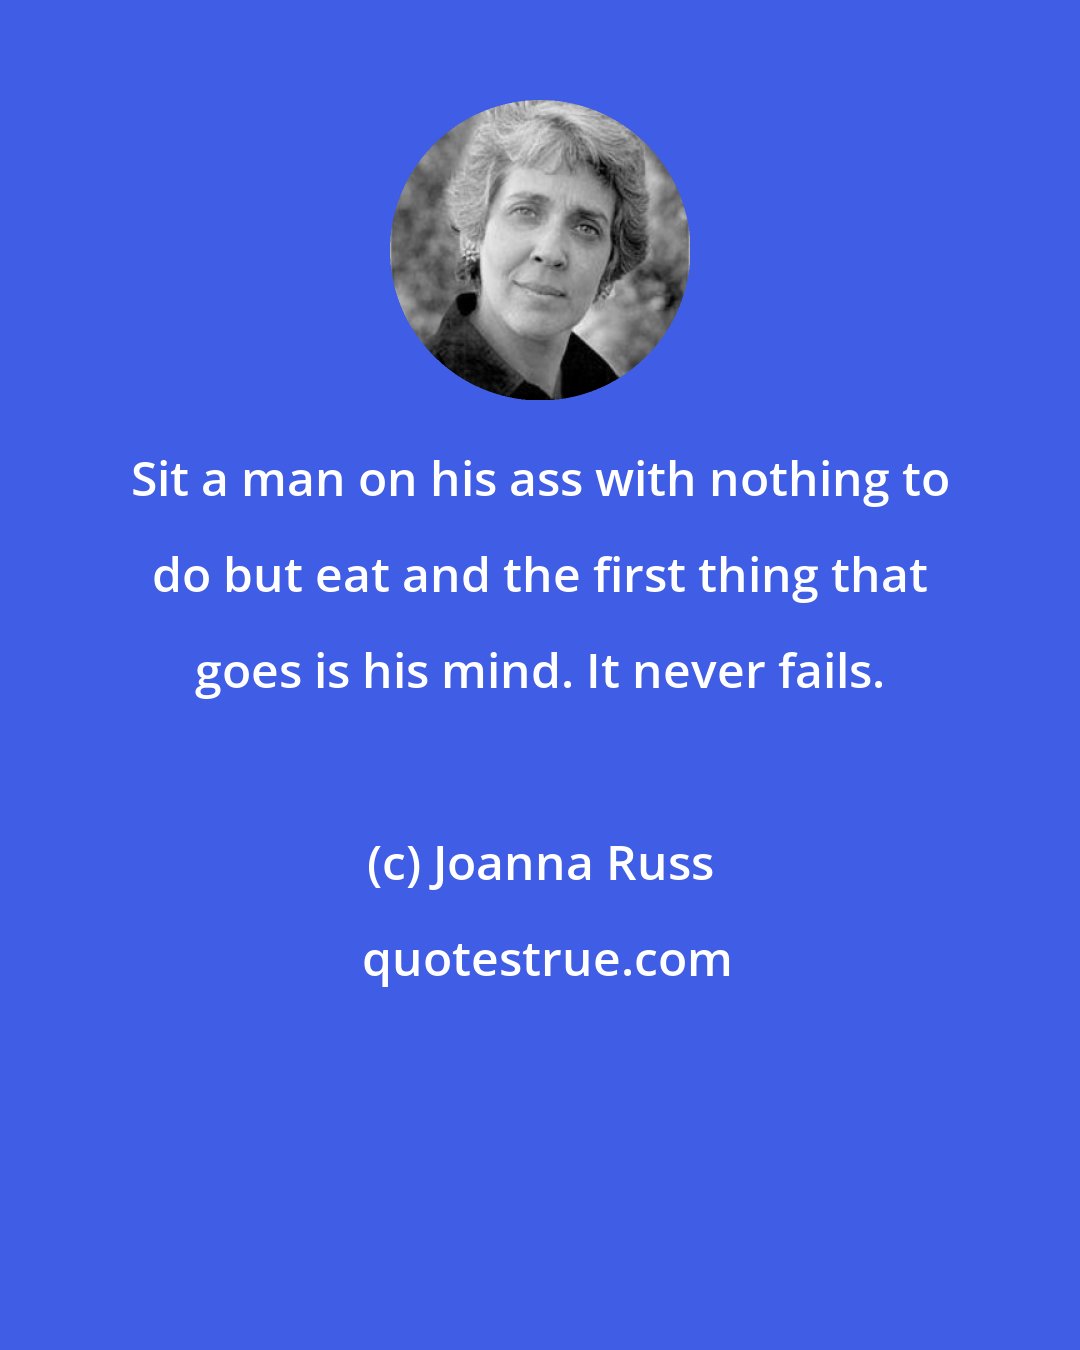 Joanna Russ: Sit a man on his ass with nothing to do but eat and the first thing that goes is his mind. It never fails.